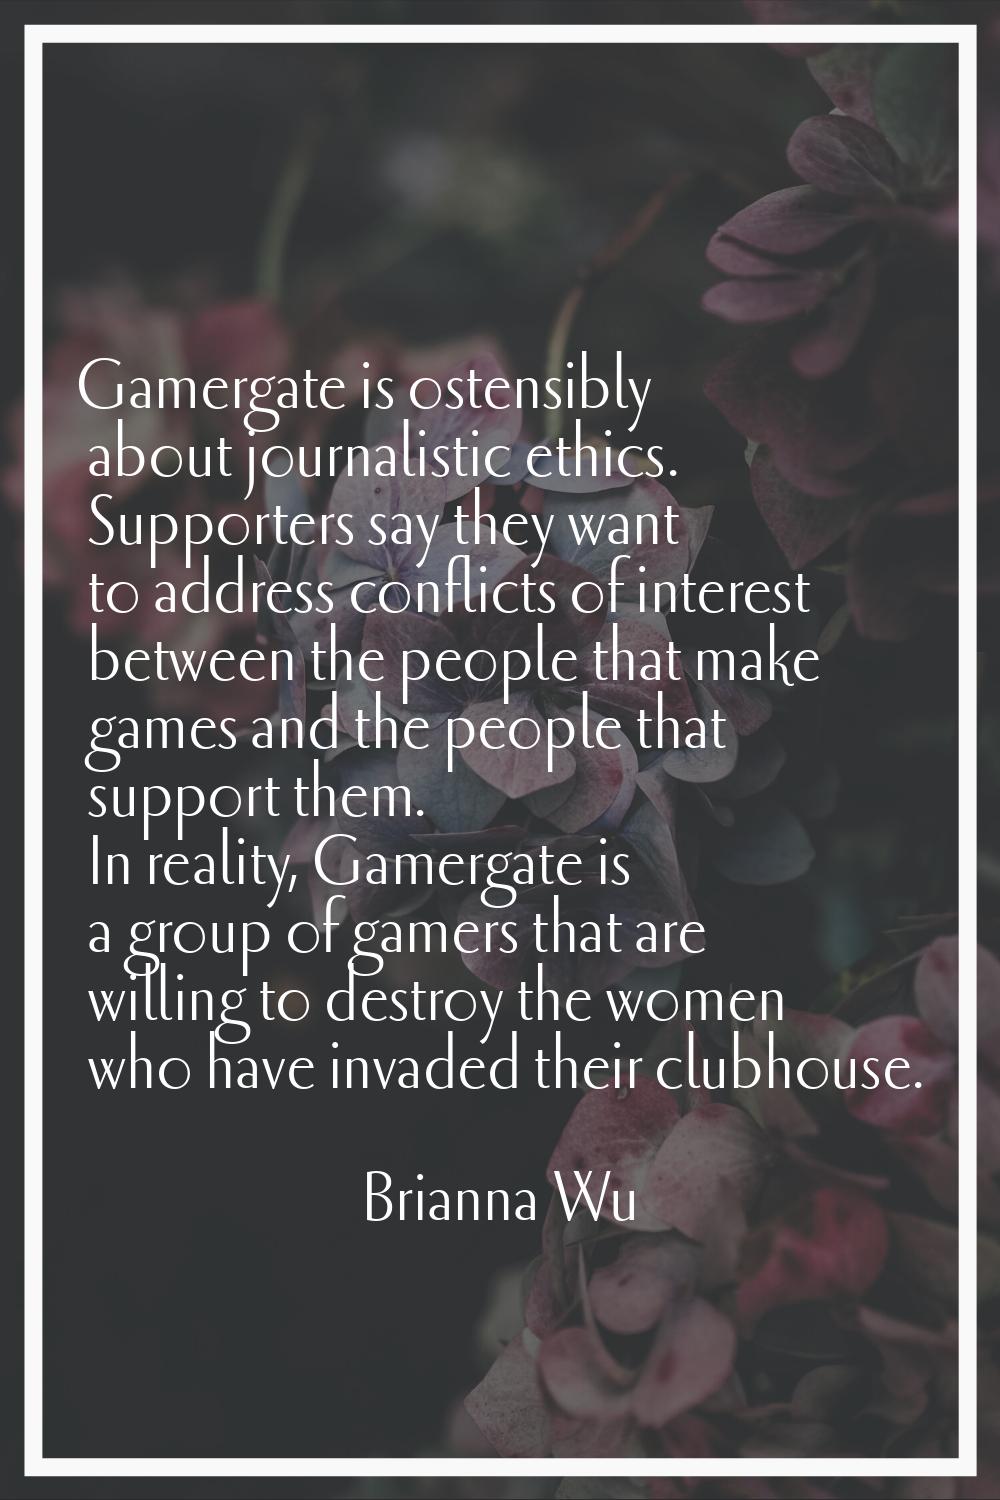 Gamergate is ostensibly about journalistic ethics. Supporters say they want to address conflicts of